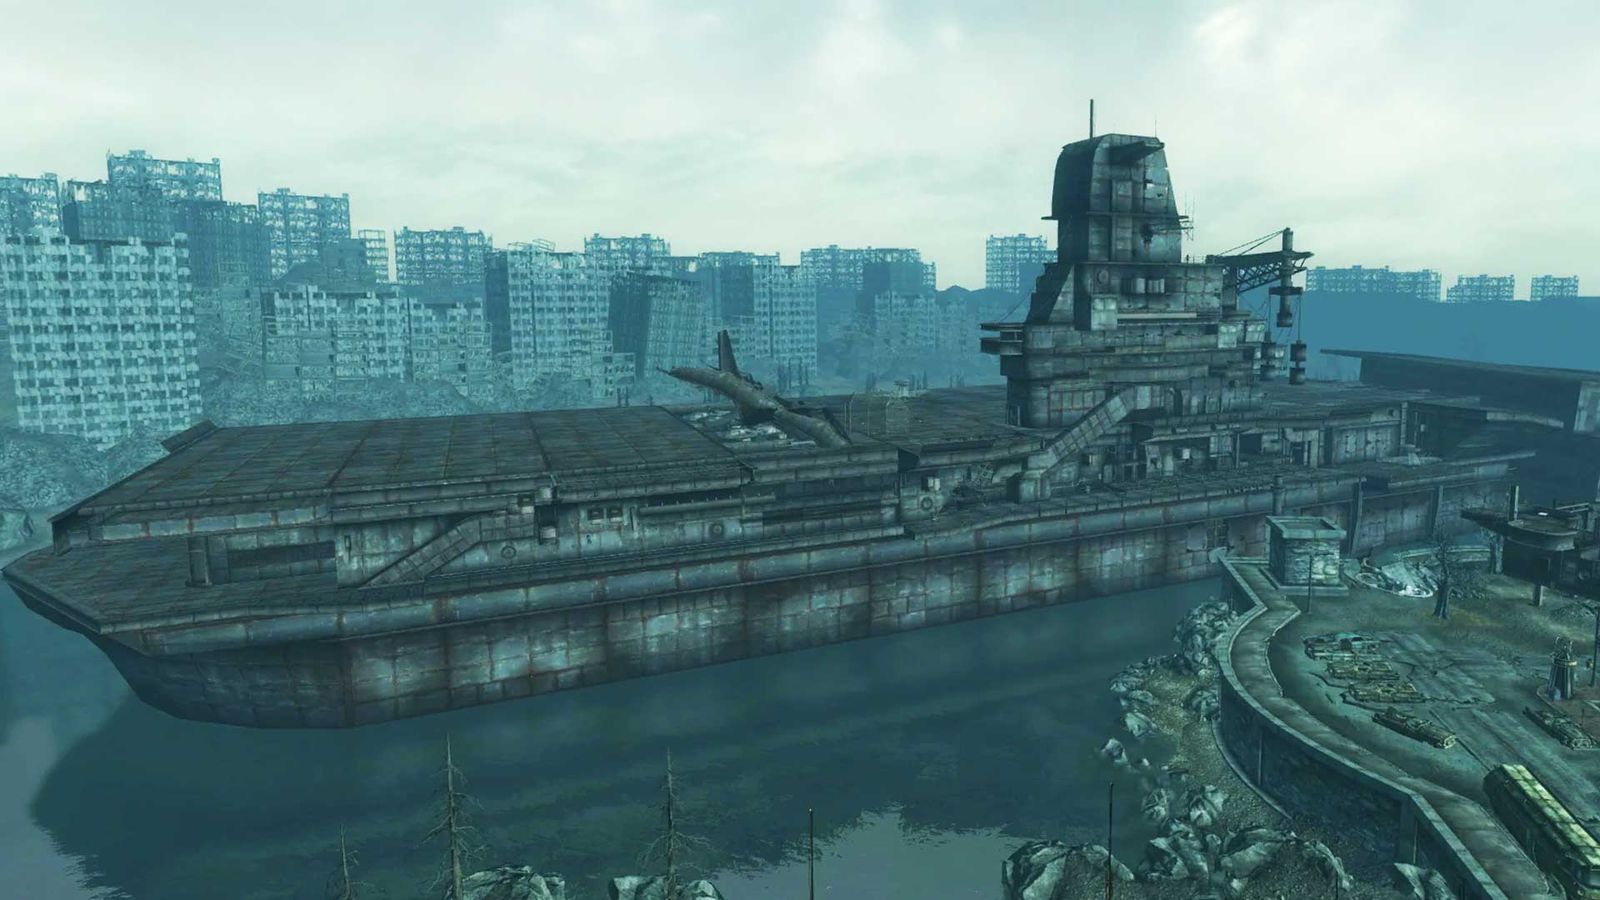 Rivet City from Fallout 3, in at number 10 in the Top 10 worst video game cities to live in.